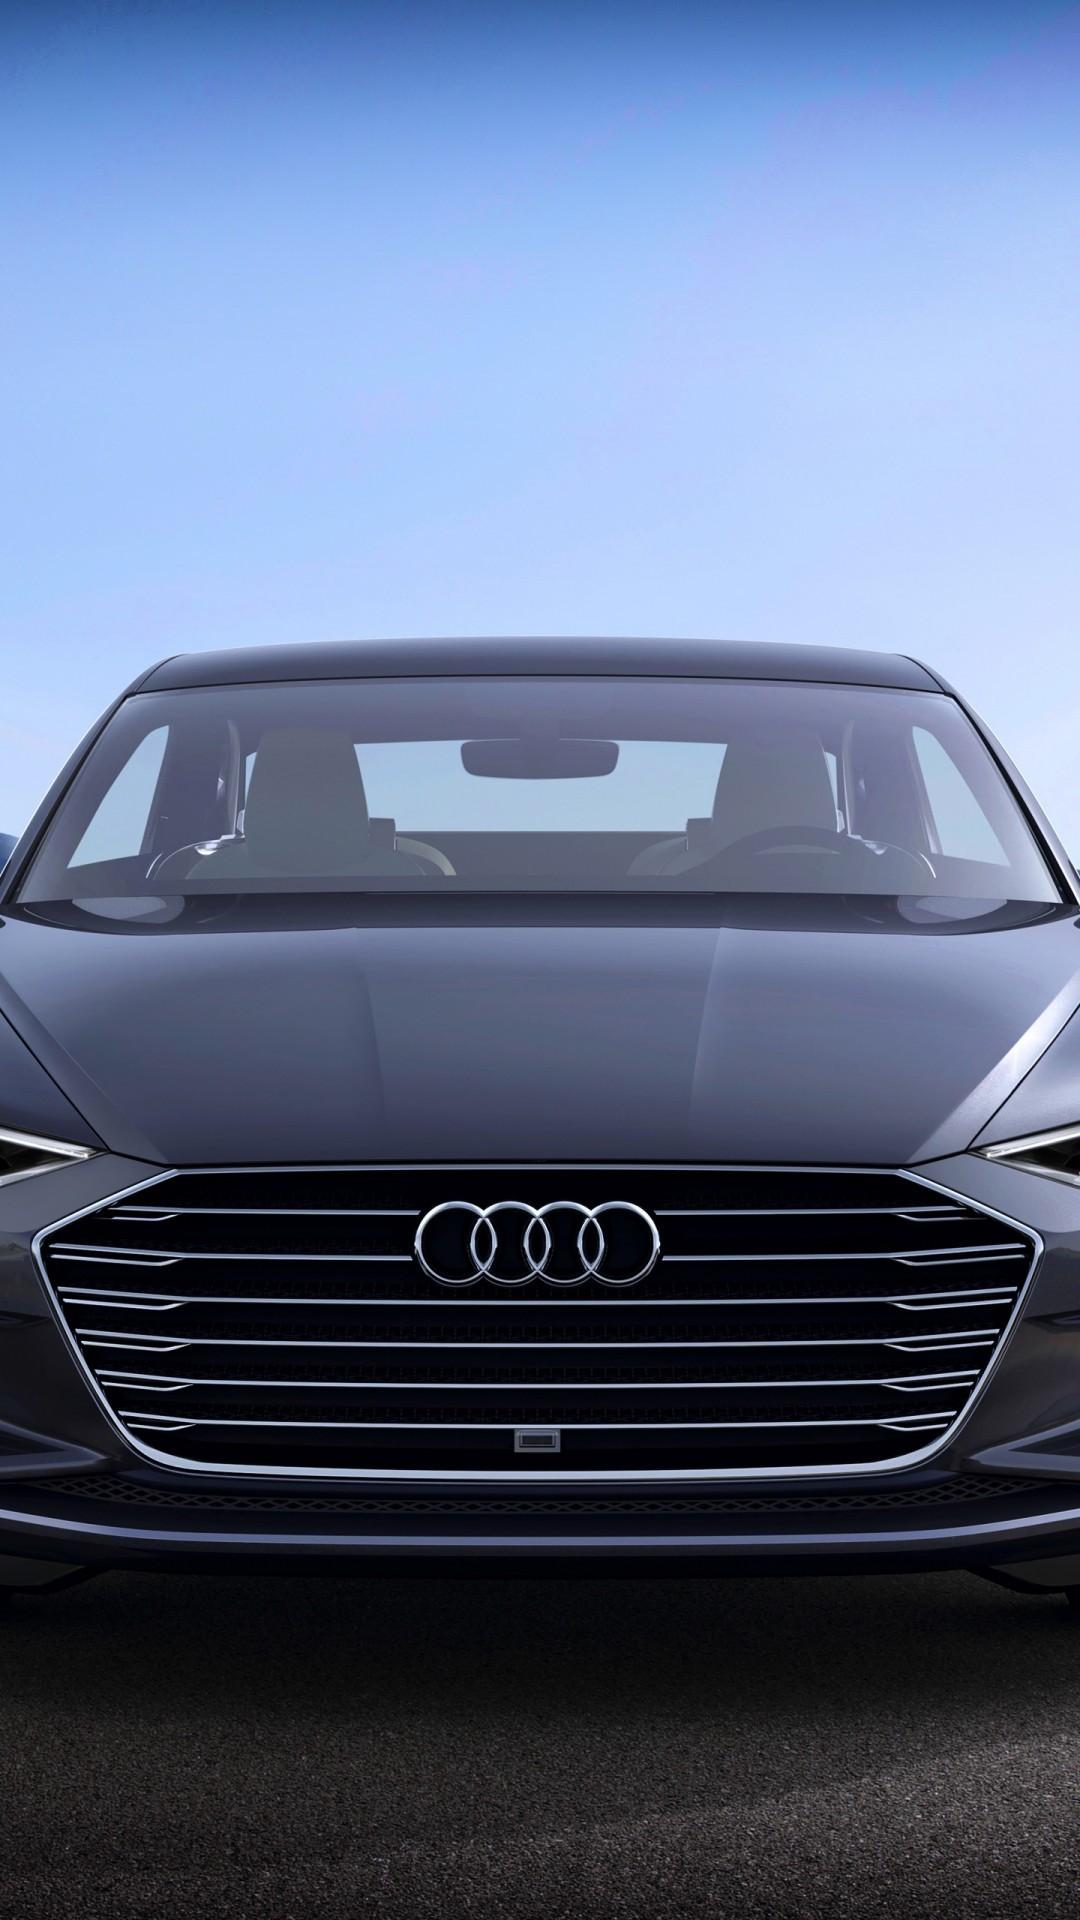 Download 1080x1920 Audi A Prologue, Front View, Silver, Cars